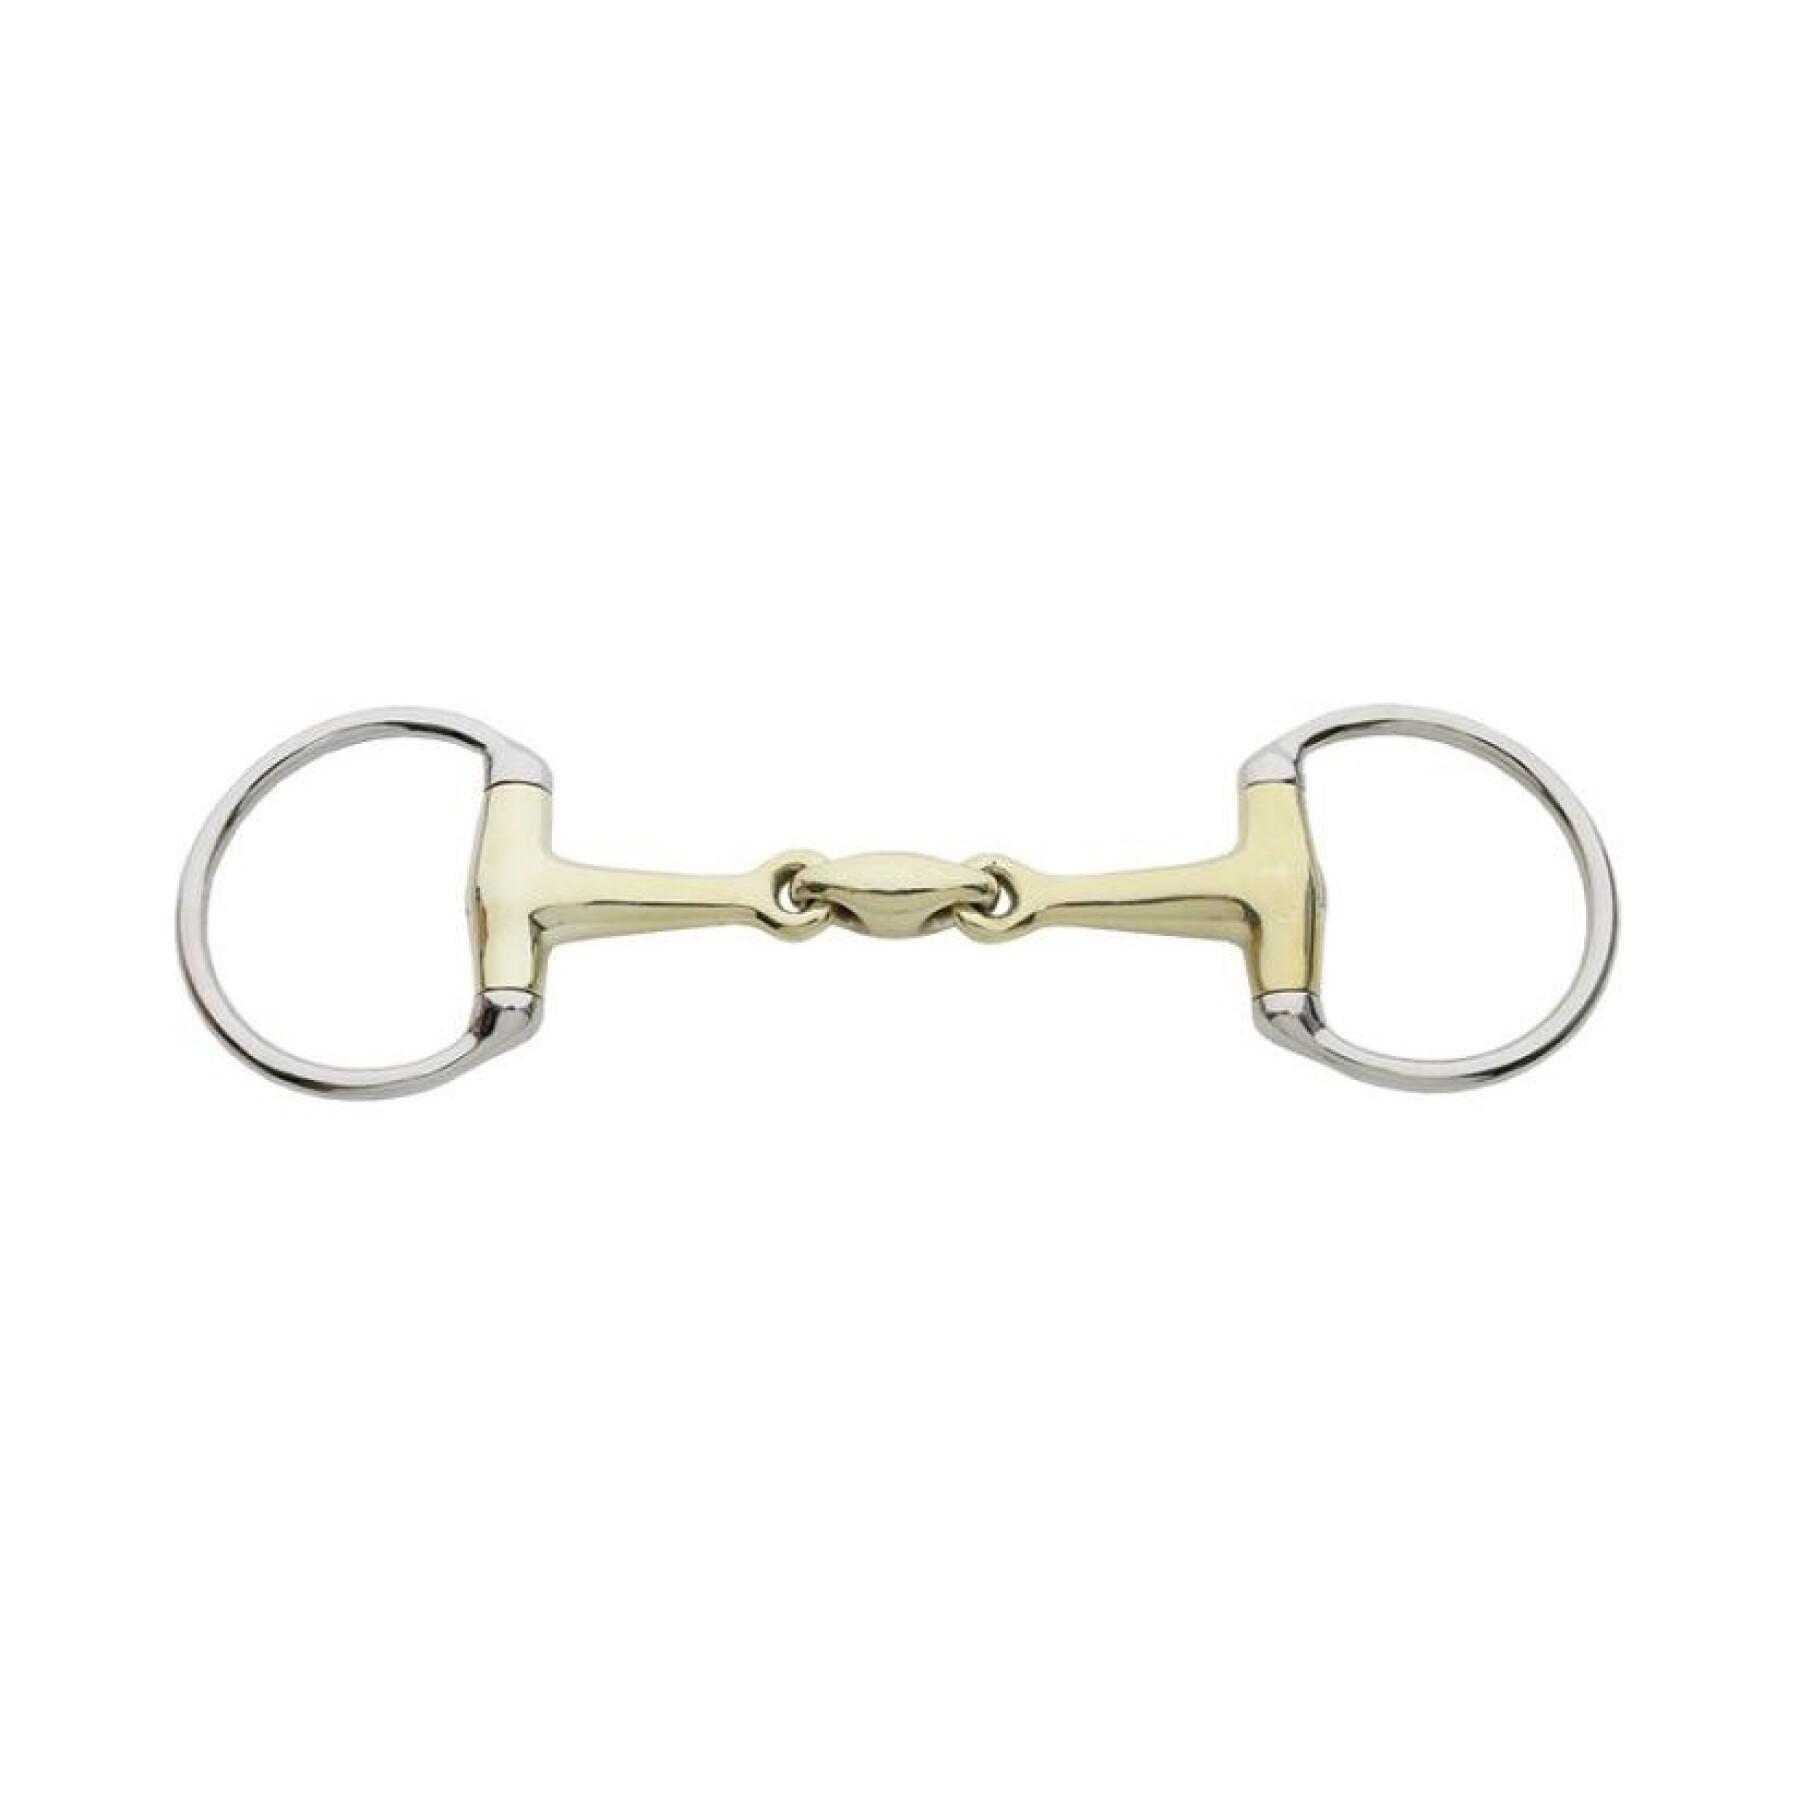 Olive bit for horse with double break Kavalkade KavalBit 12 mm